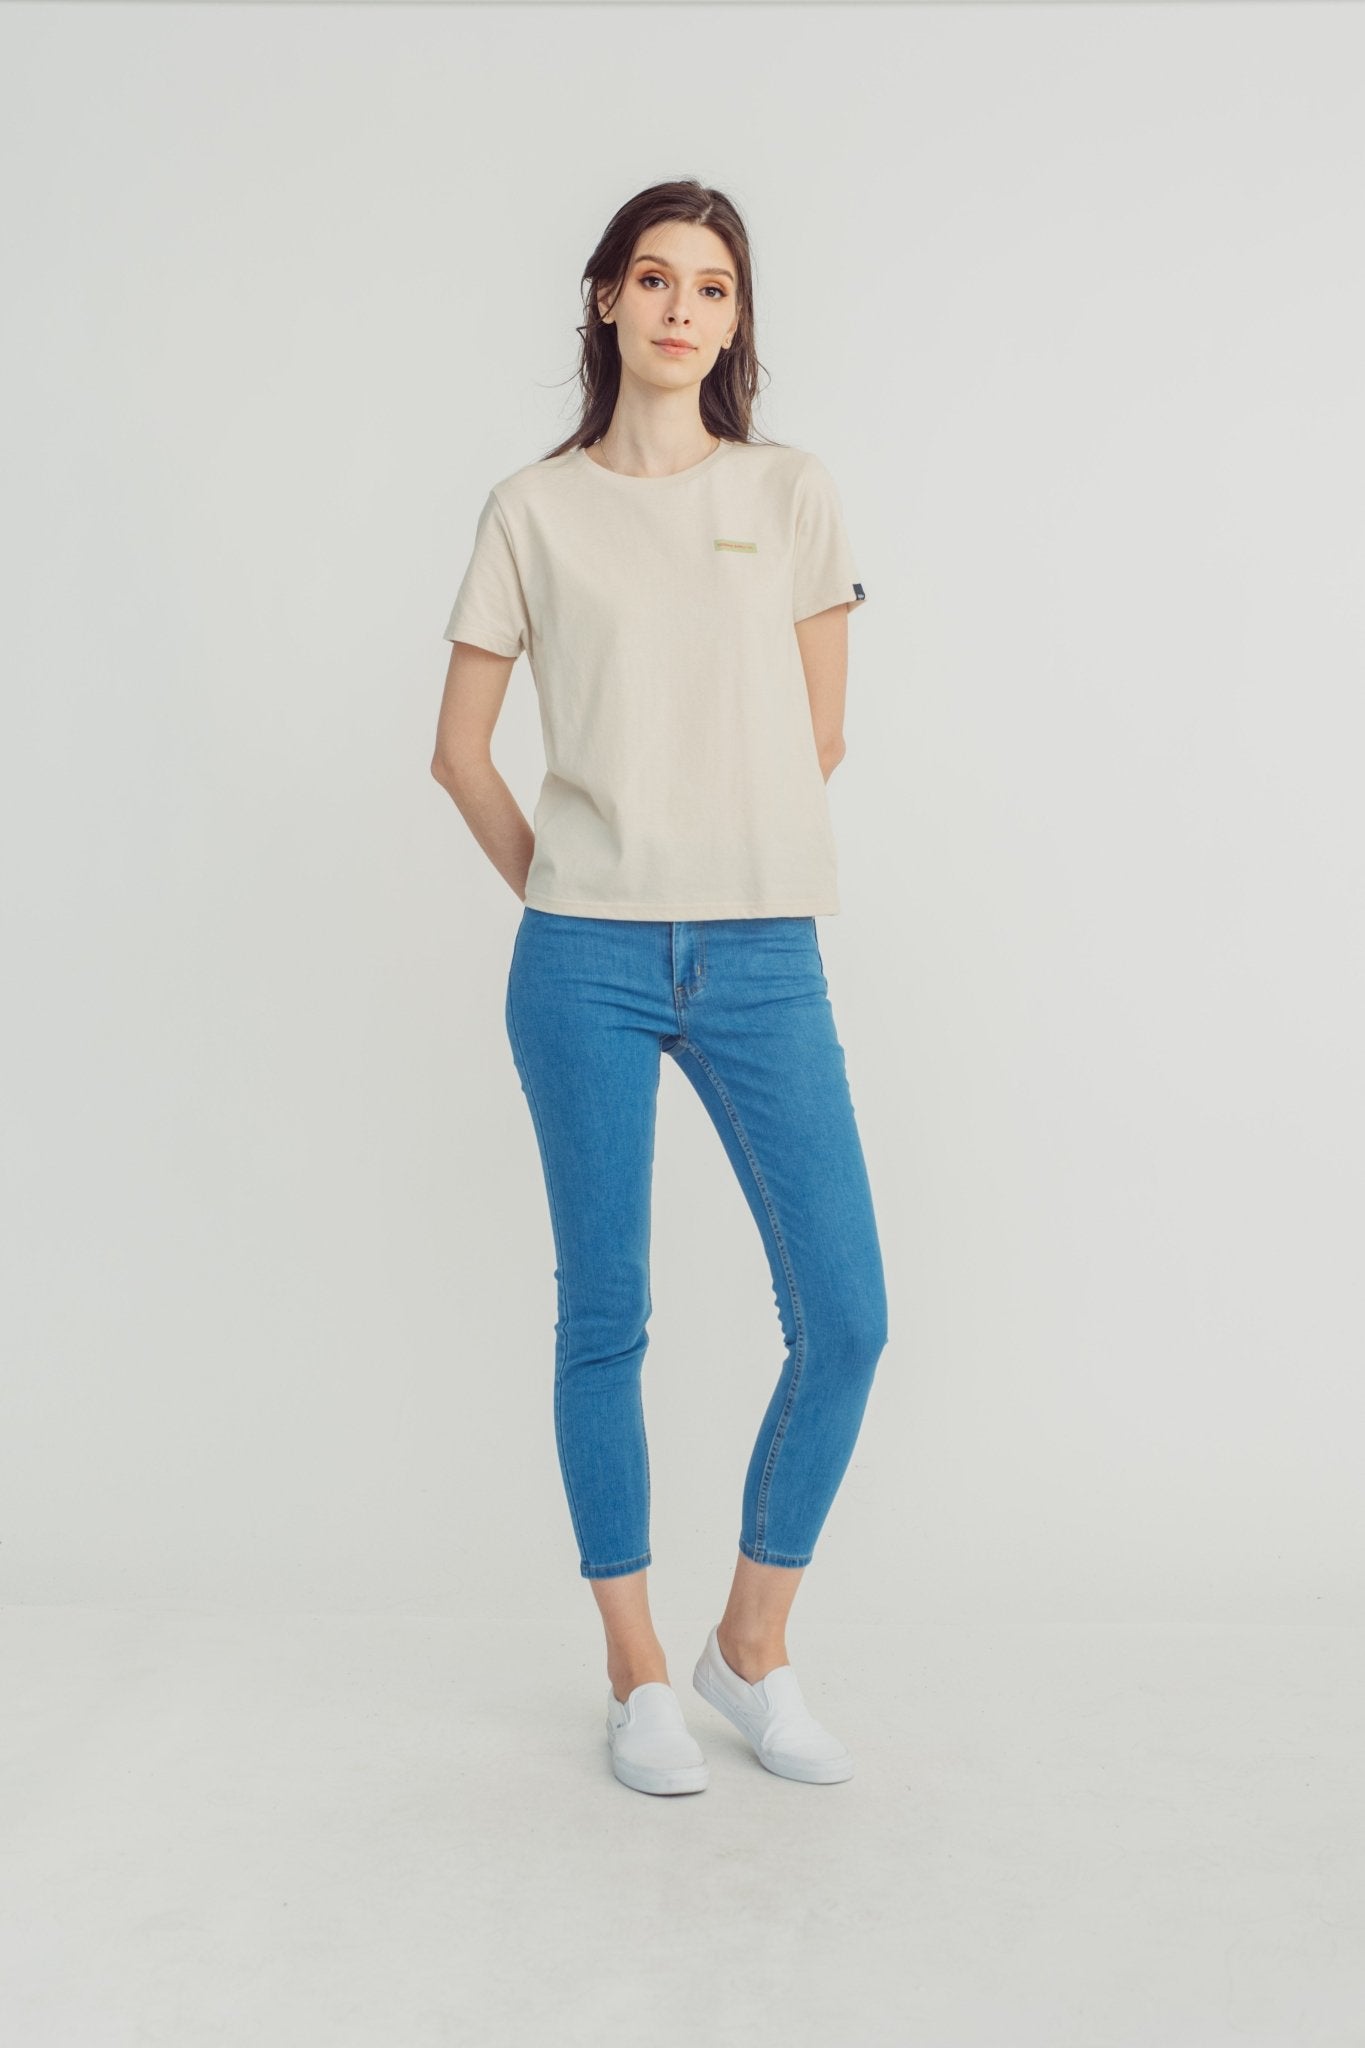 Oatmeal Small Branding Classic Fit Tee - Mossimo PH